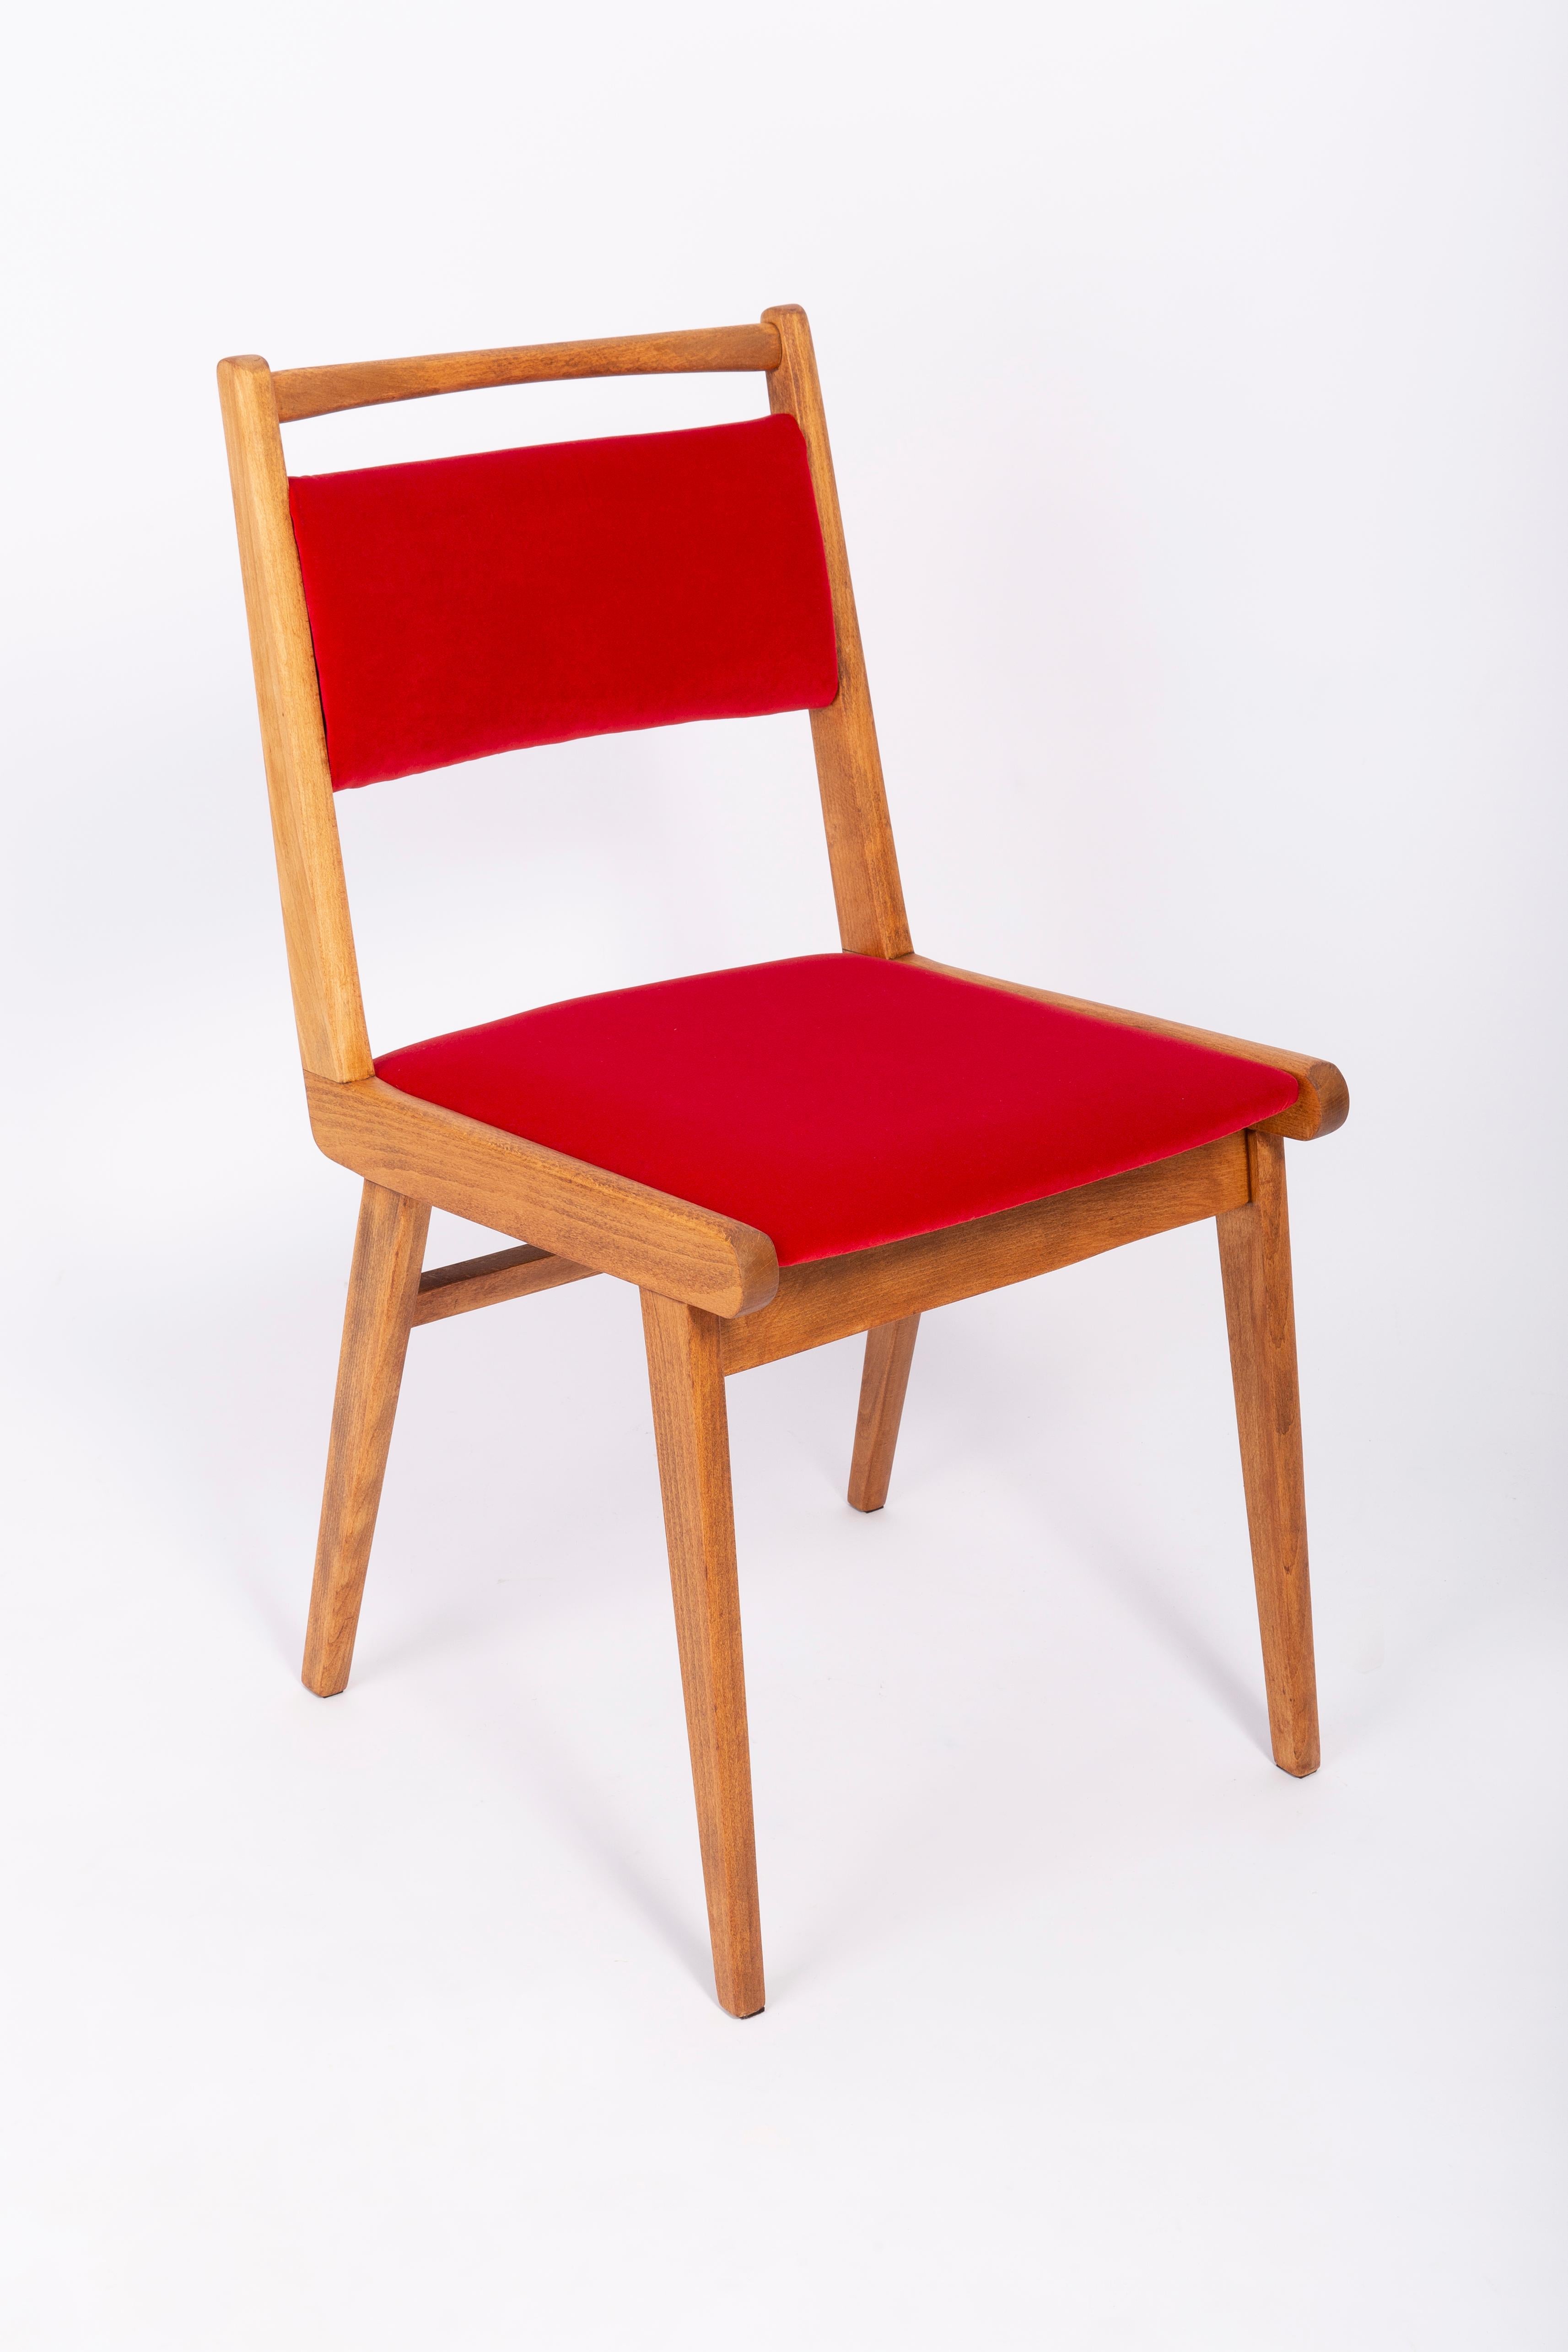 Set of Two 20th Century White and Red Velvet Chairs, Poland, 1960s For Sale 5